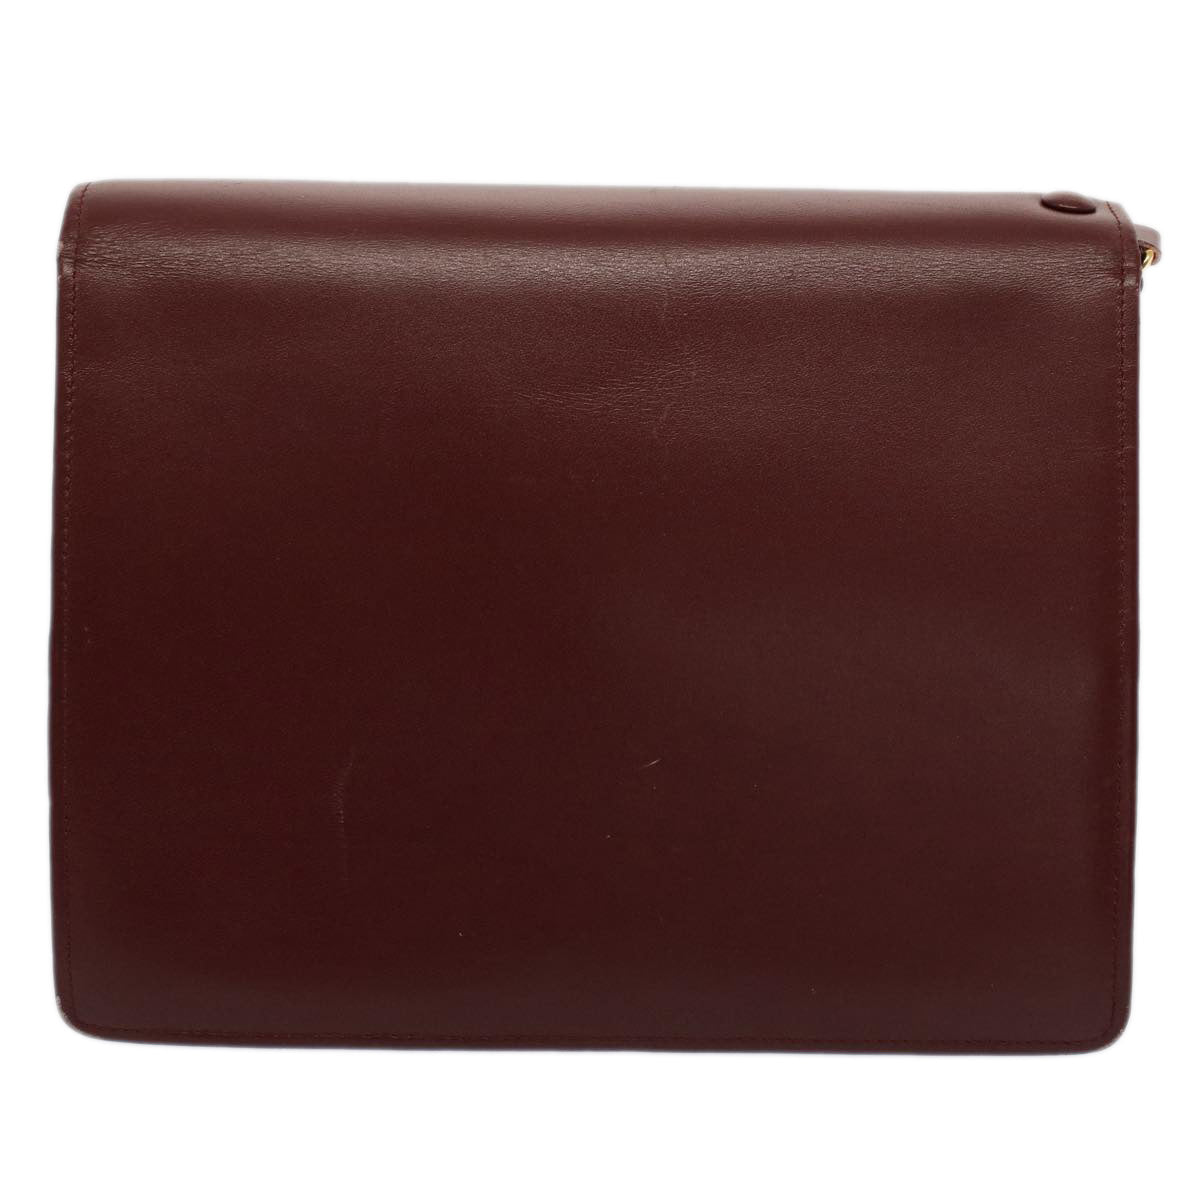 CARTIER Clutch Bag Leather Red Auth ep1696